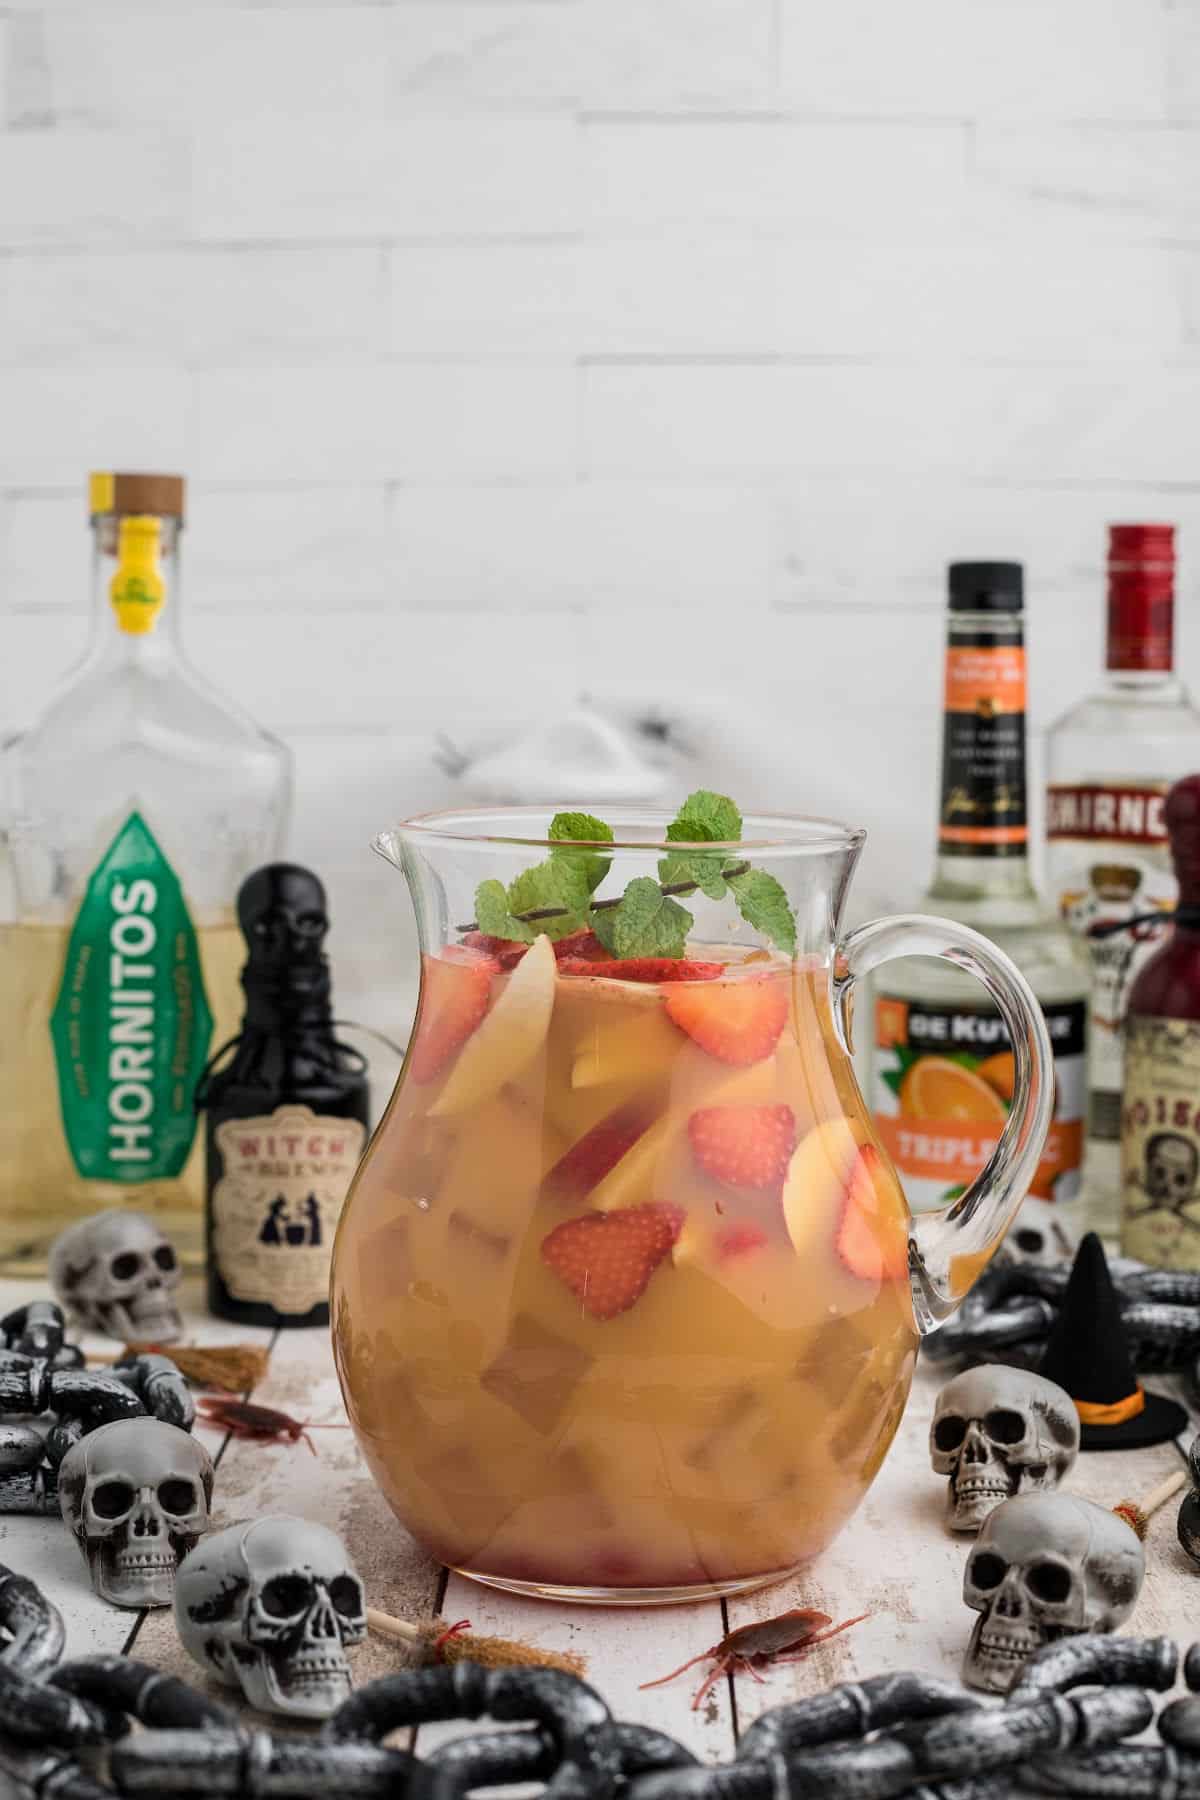 Pitcher of Jungle juice with halloween deocrations.